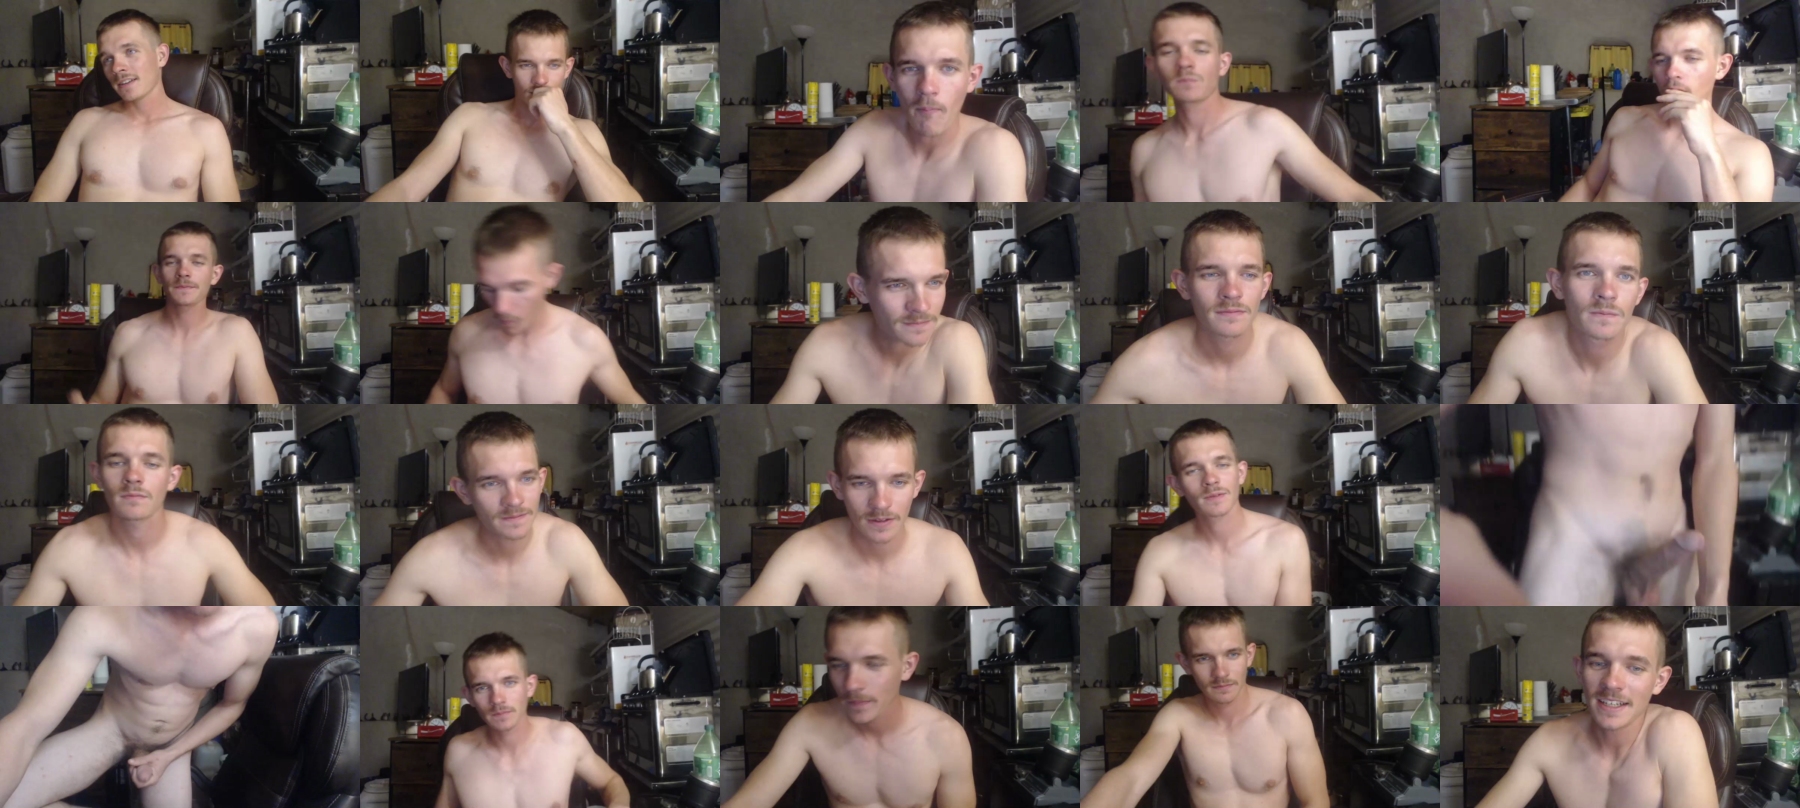 Ethansxxx  02-11-2021 Male Recorded